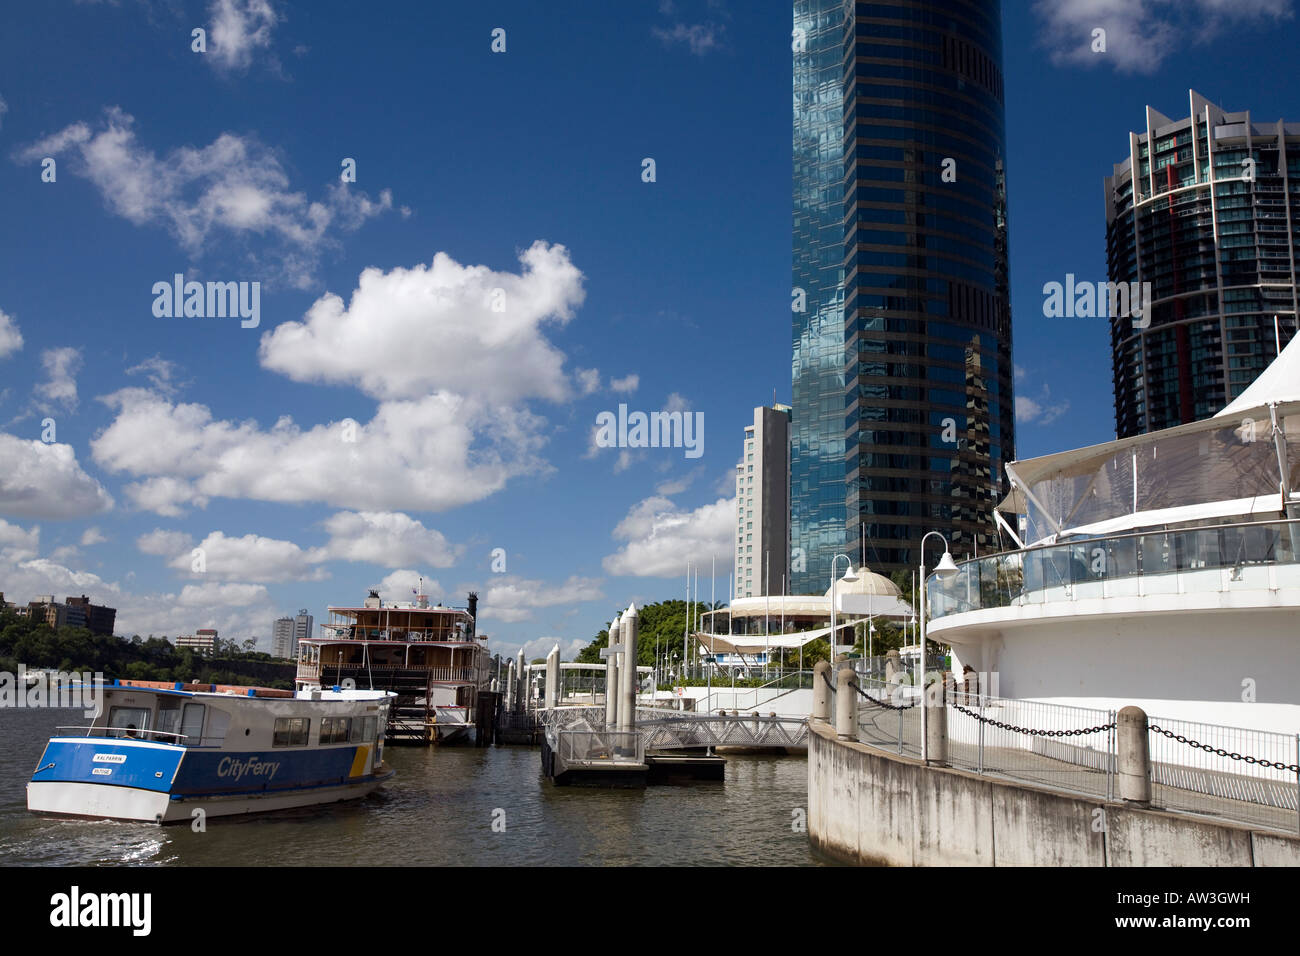 Brisbane riverside area showing ferry arriving at eagle street wharf, Stock Photo